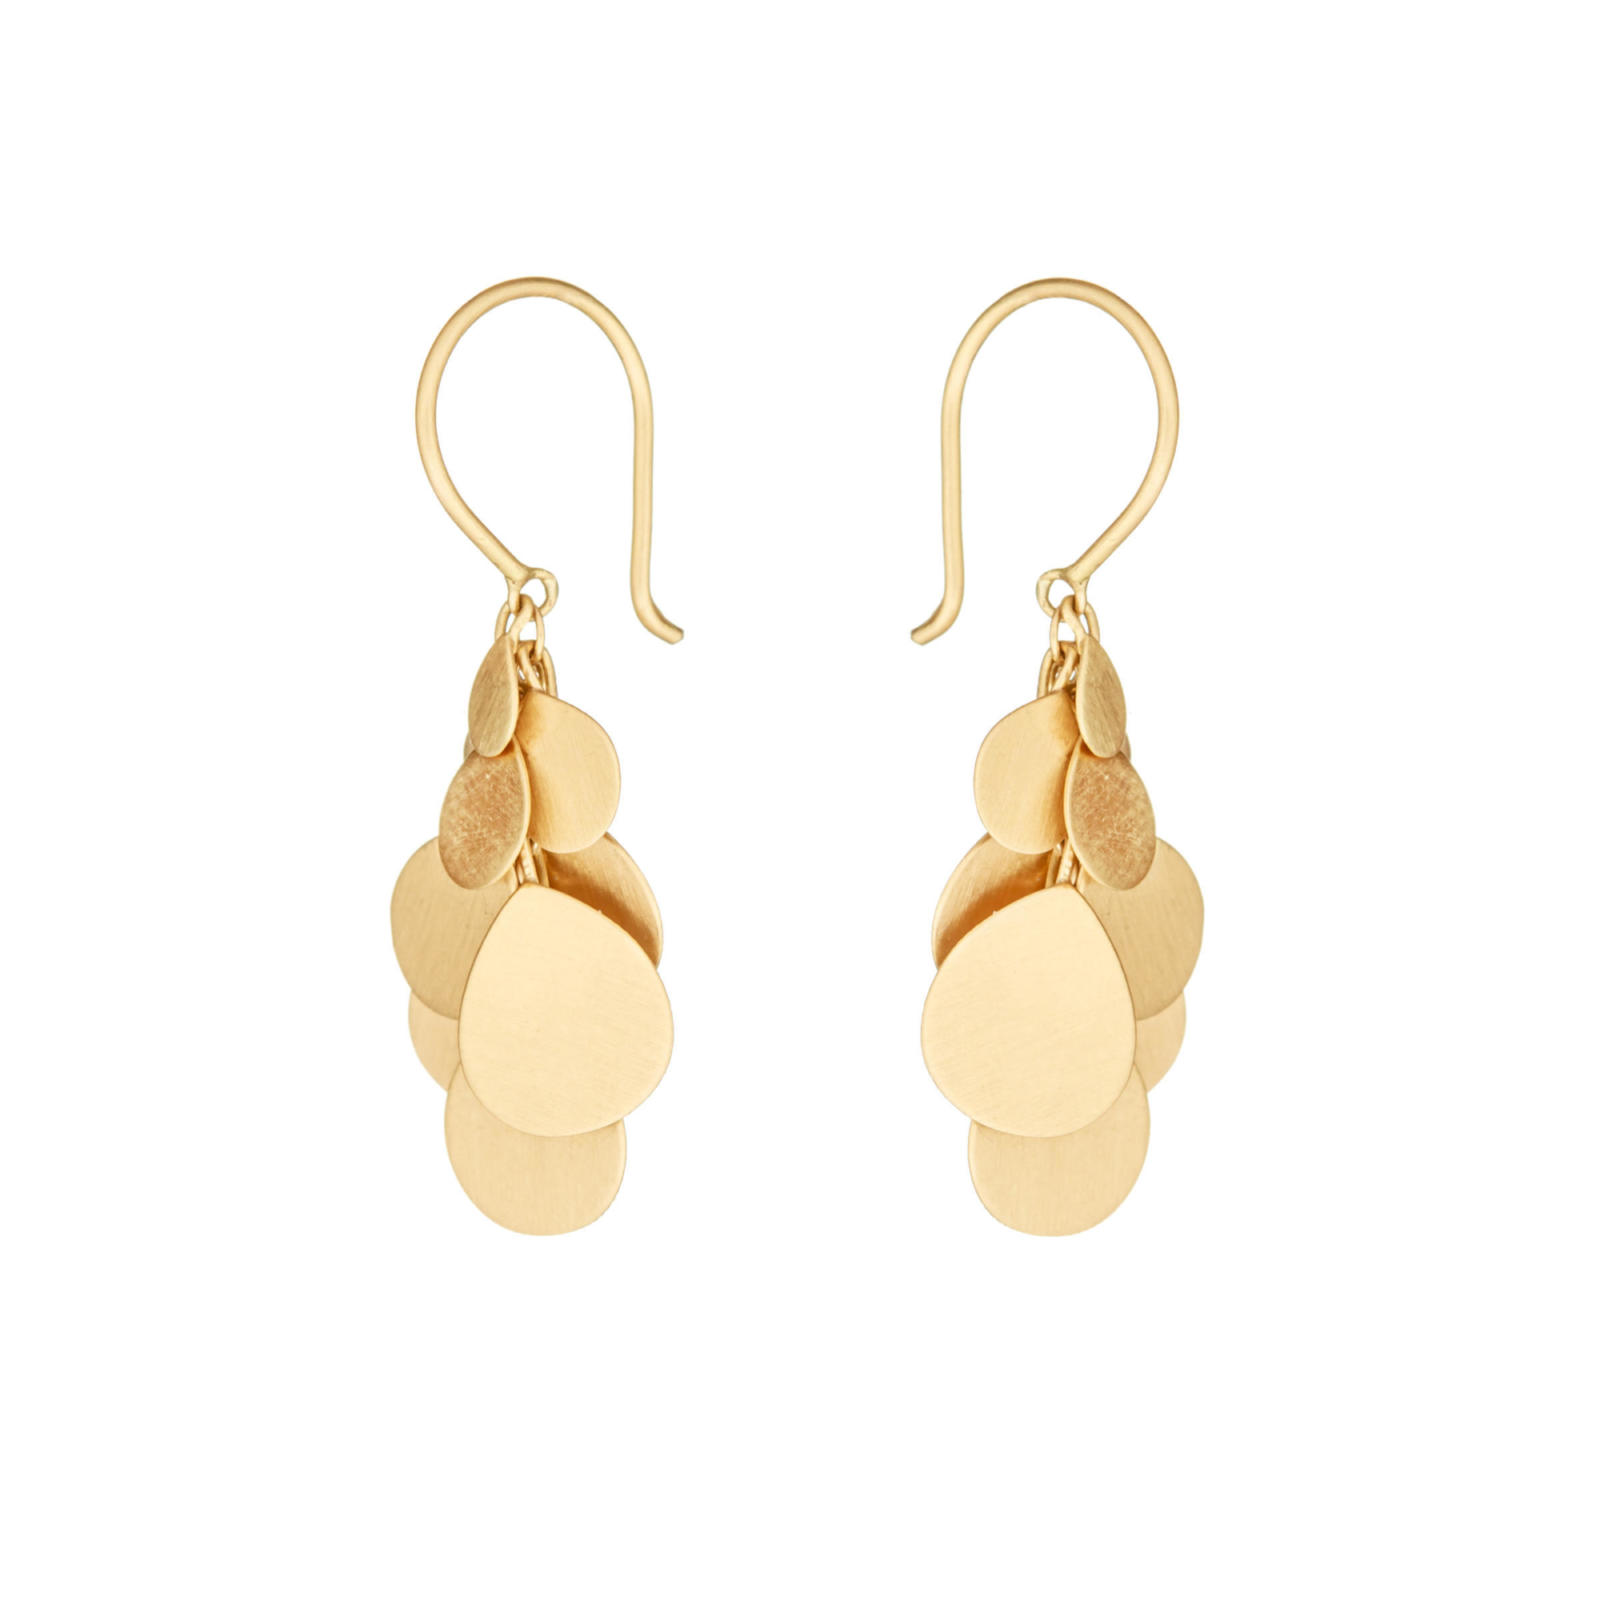 Sia Taylor ME11 Y Yellow Gold Earrings S